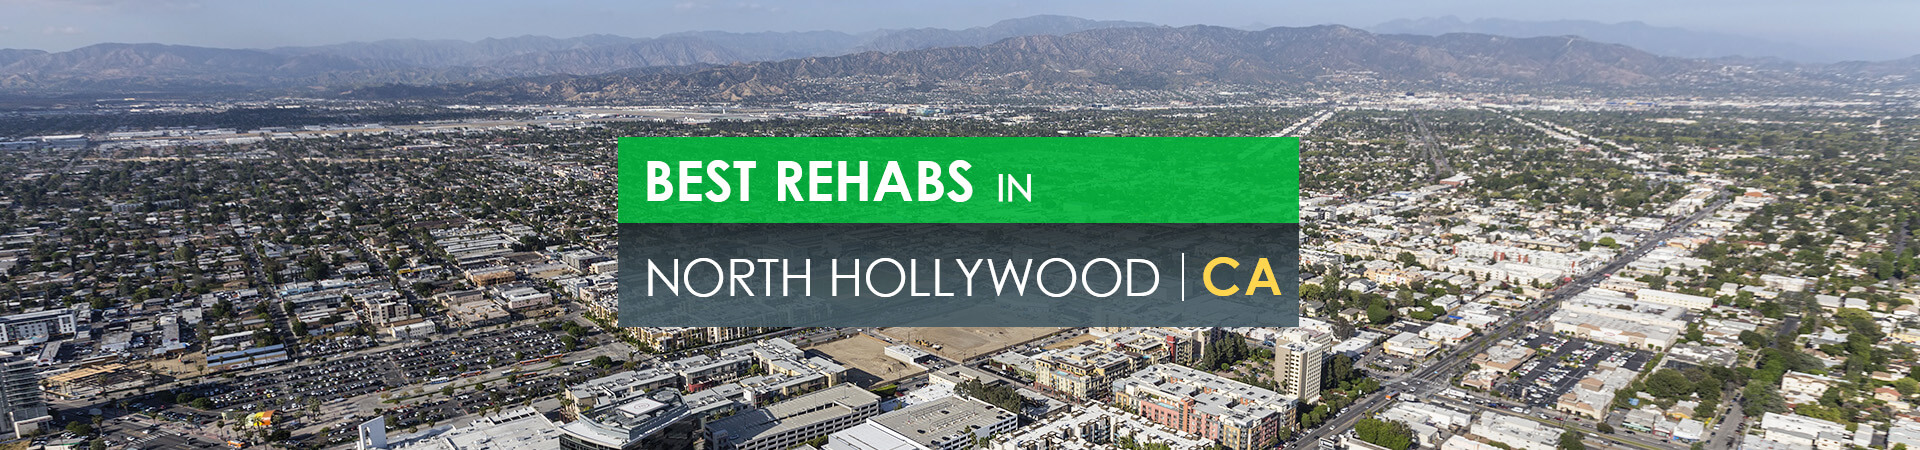 Best rehabs in North Hollywood, CA